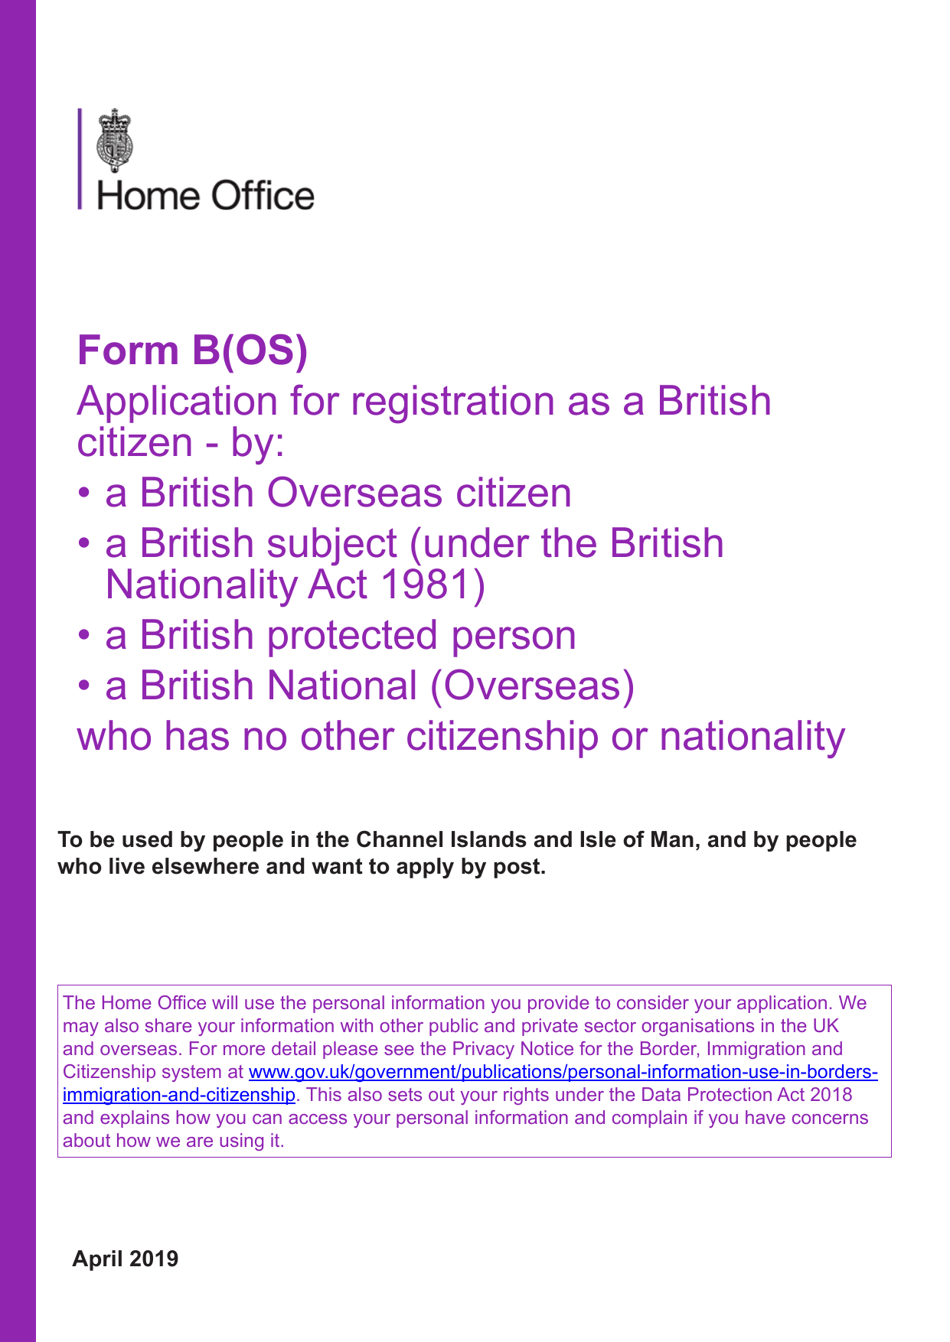 Form B(OS) Application for Registration as a British Citizen - United Kingdom, Page 1